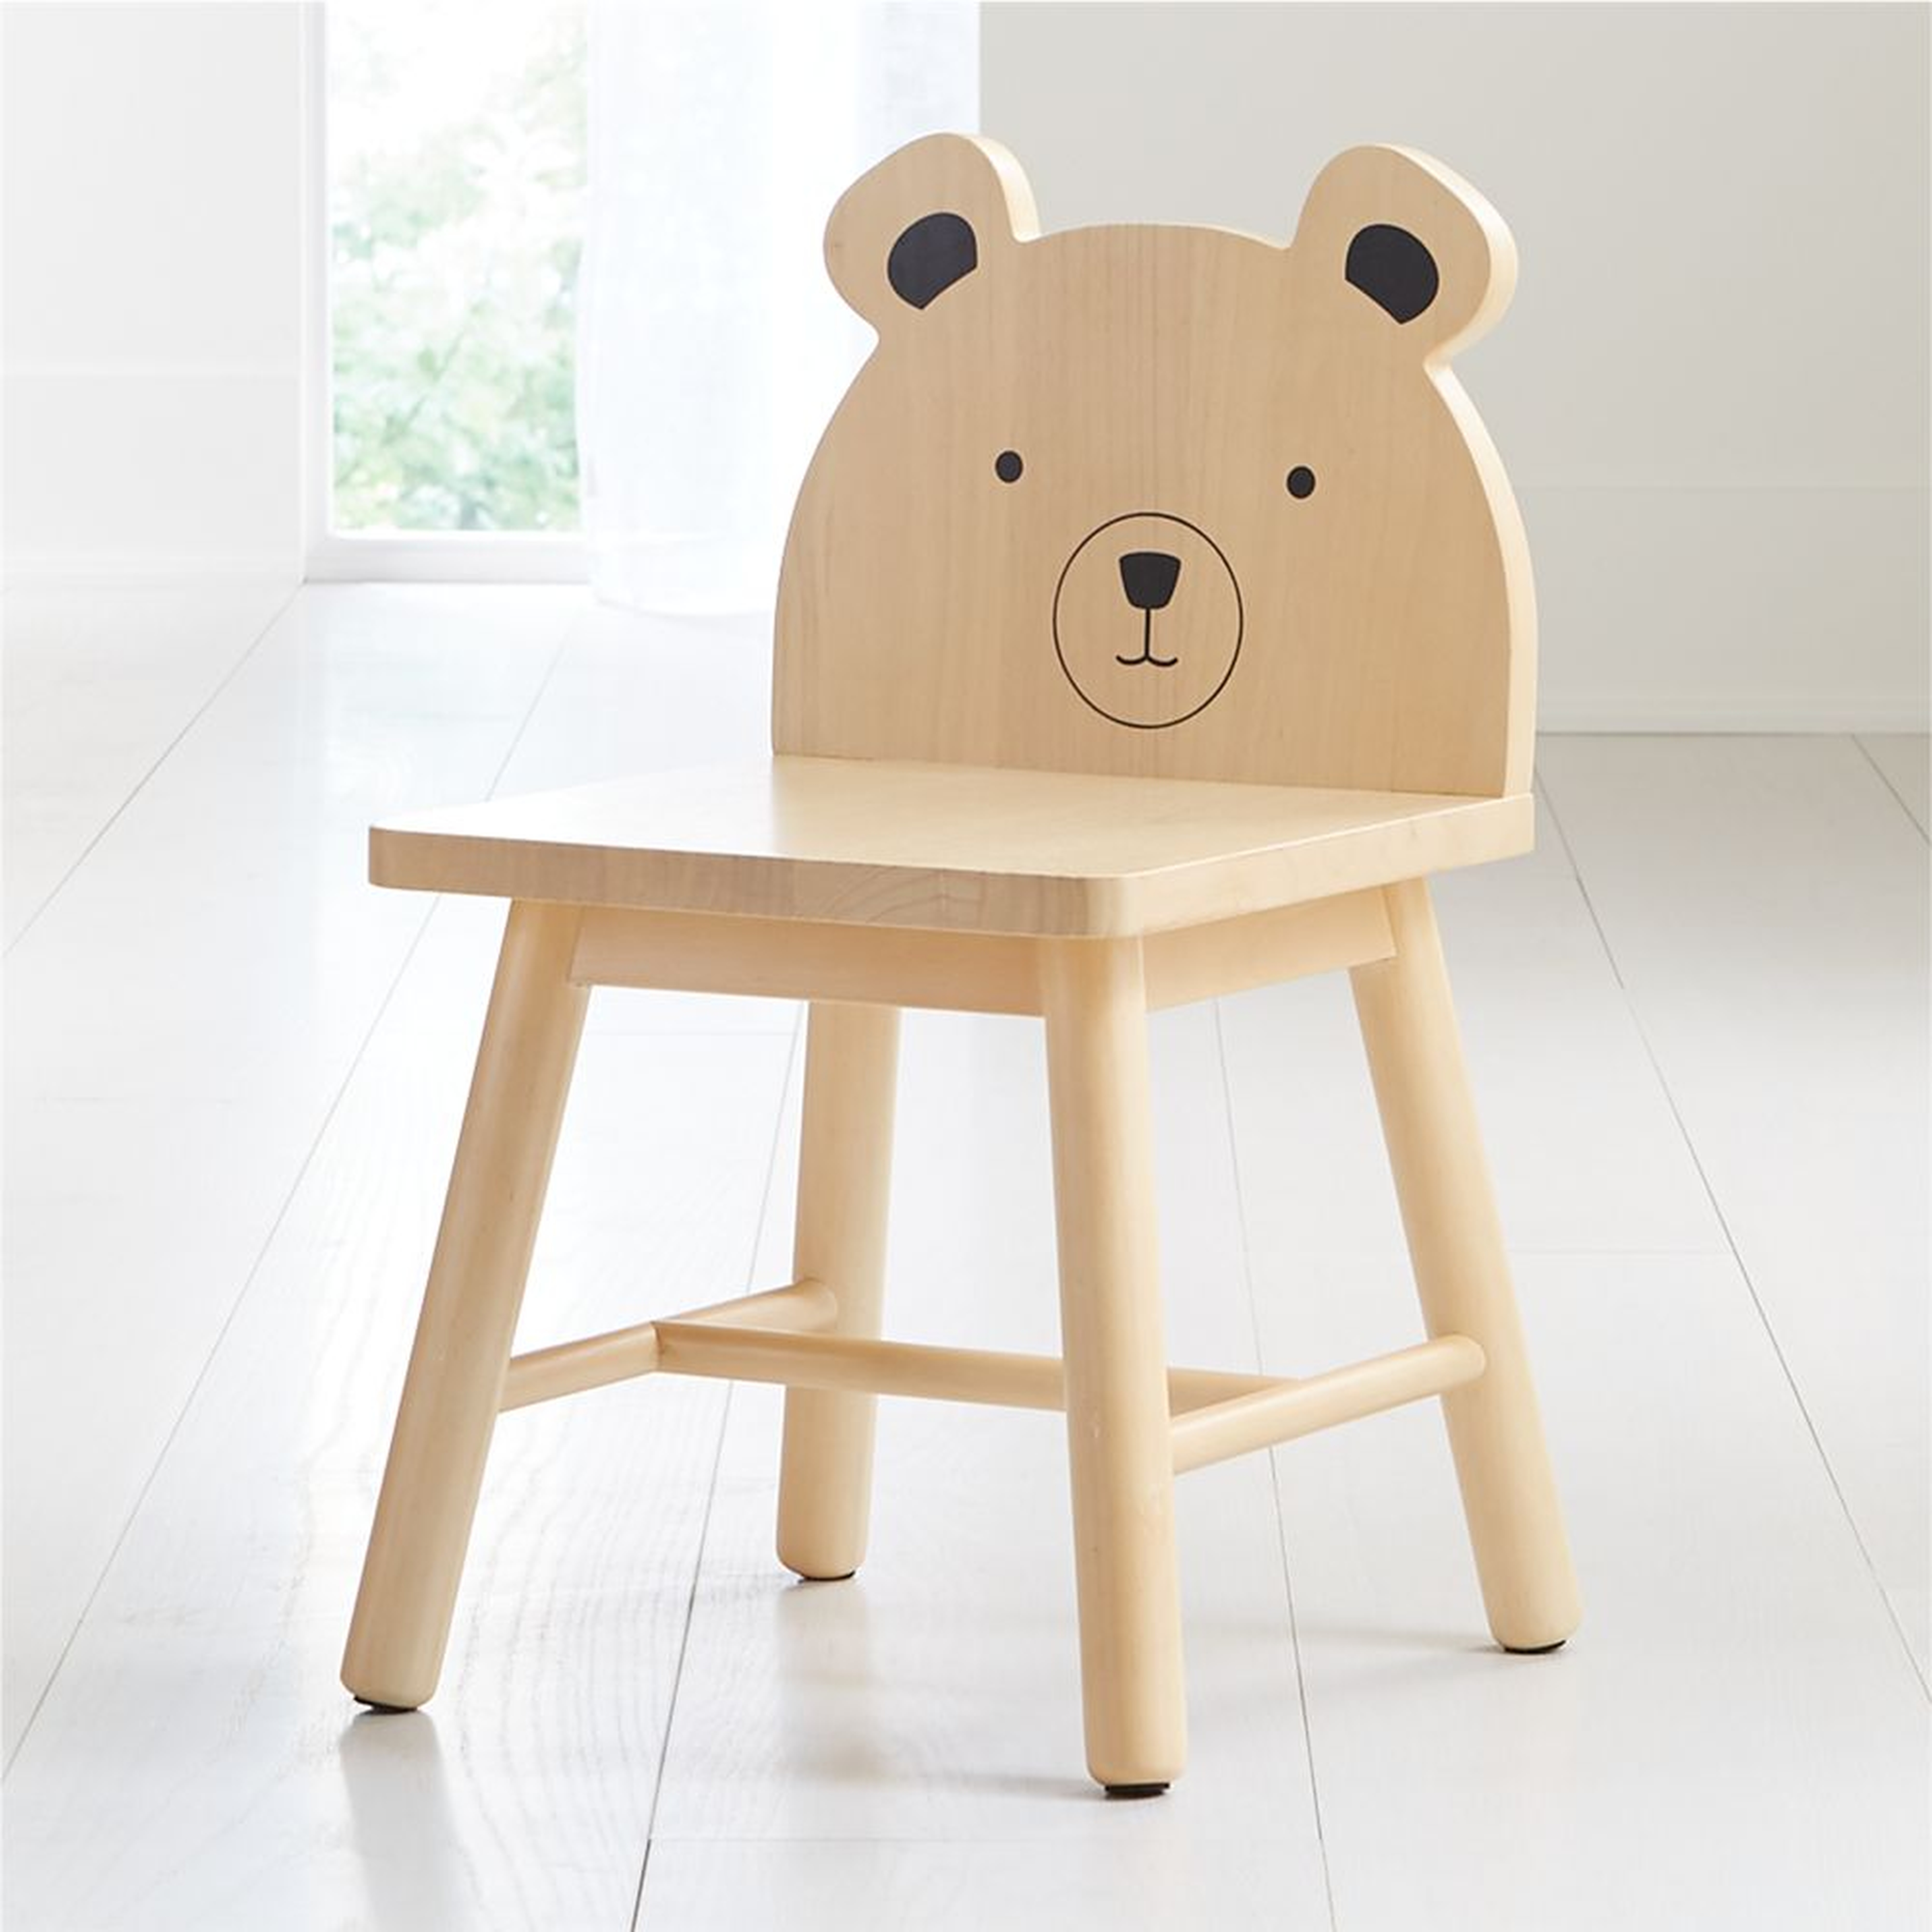 Bear Animal Wood Kids Play Chair - Crate and Barrel